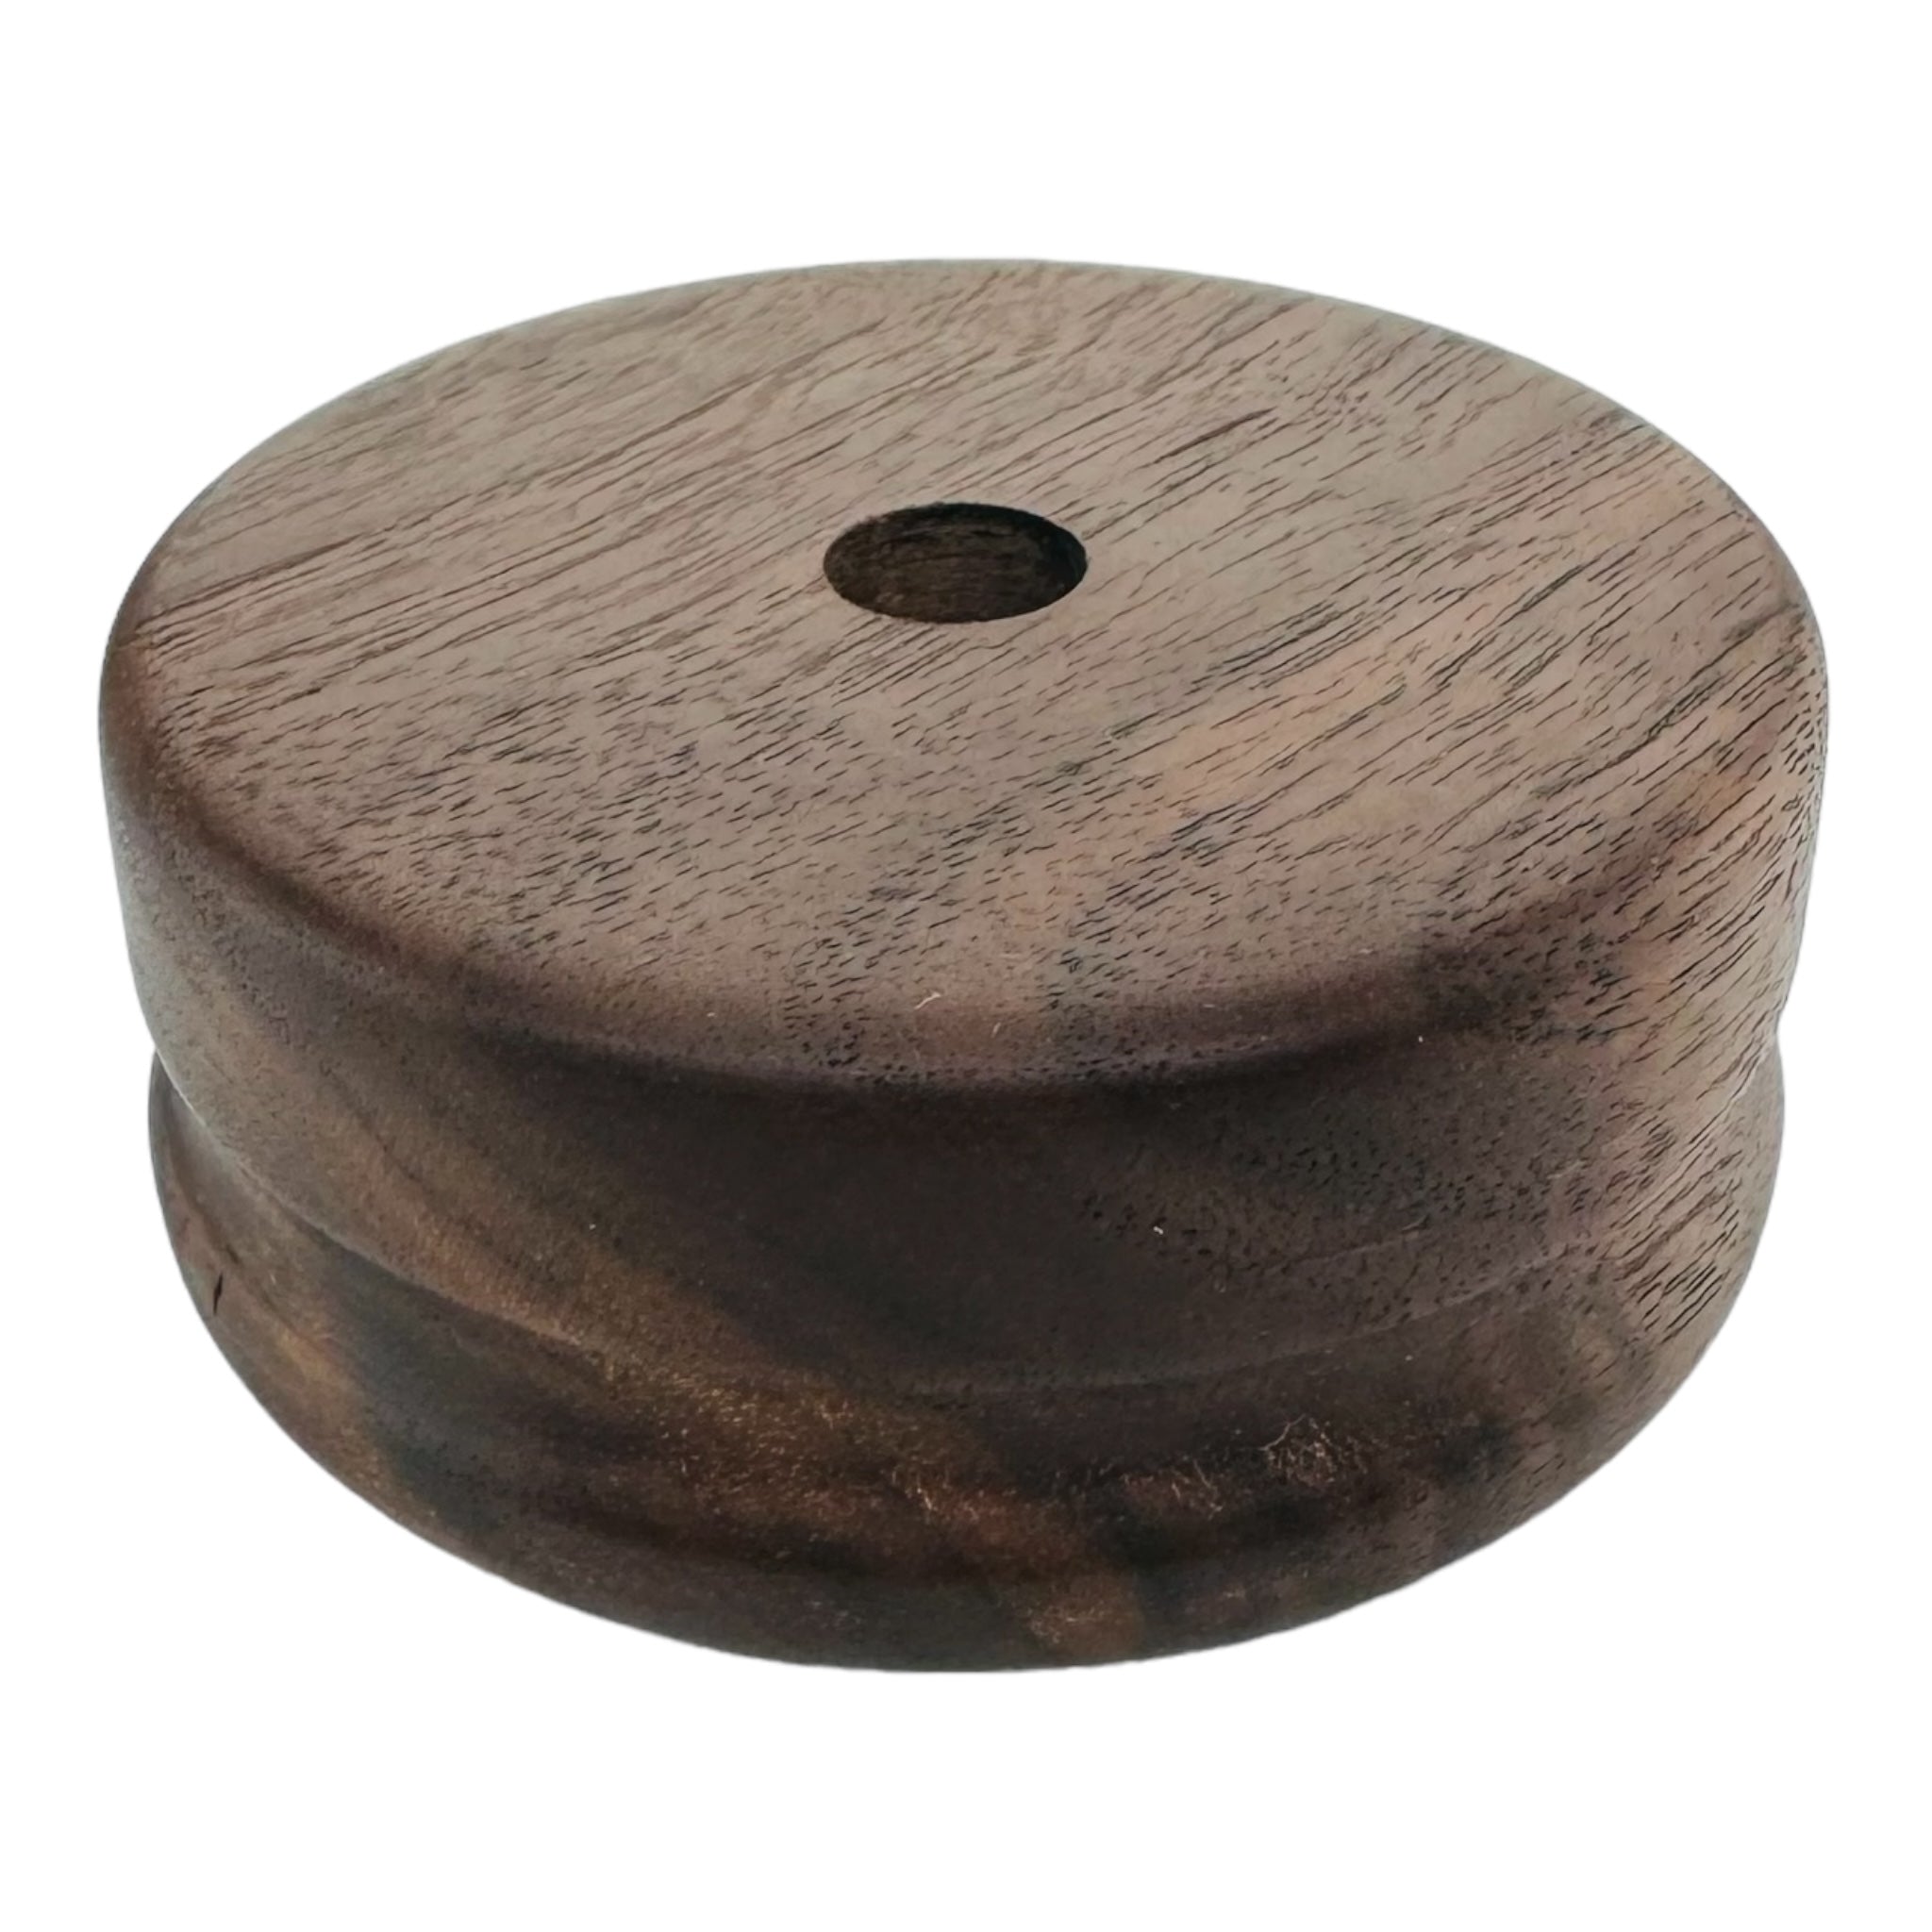 Single Hole Wood Display Stand Holder For 14mm Bong Bowl Pieces Or Quartz Bangers - Black Walnut